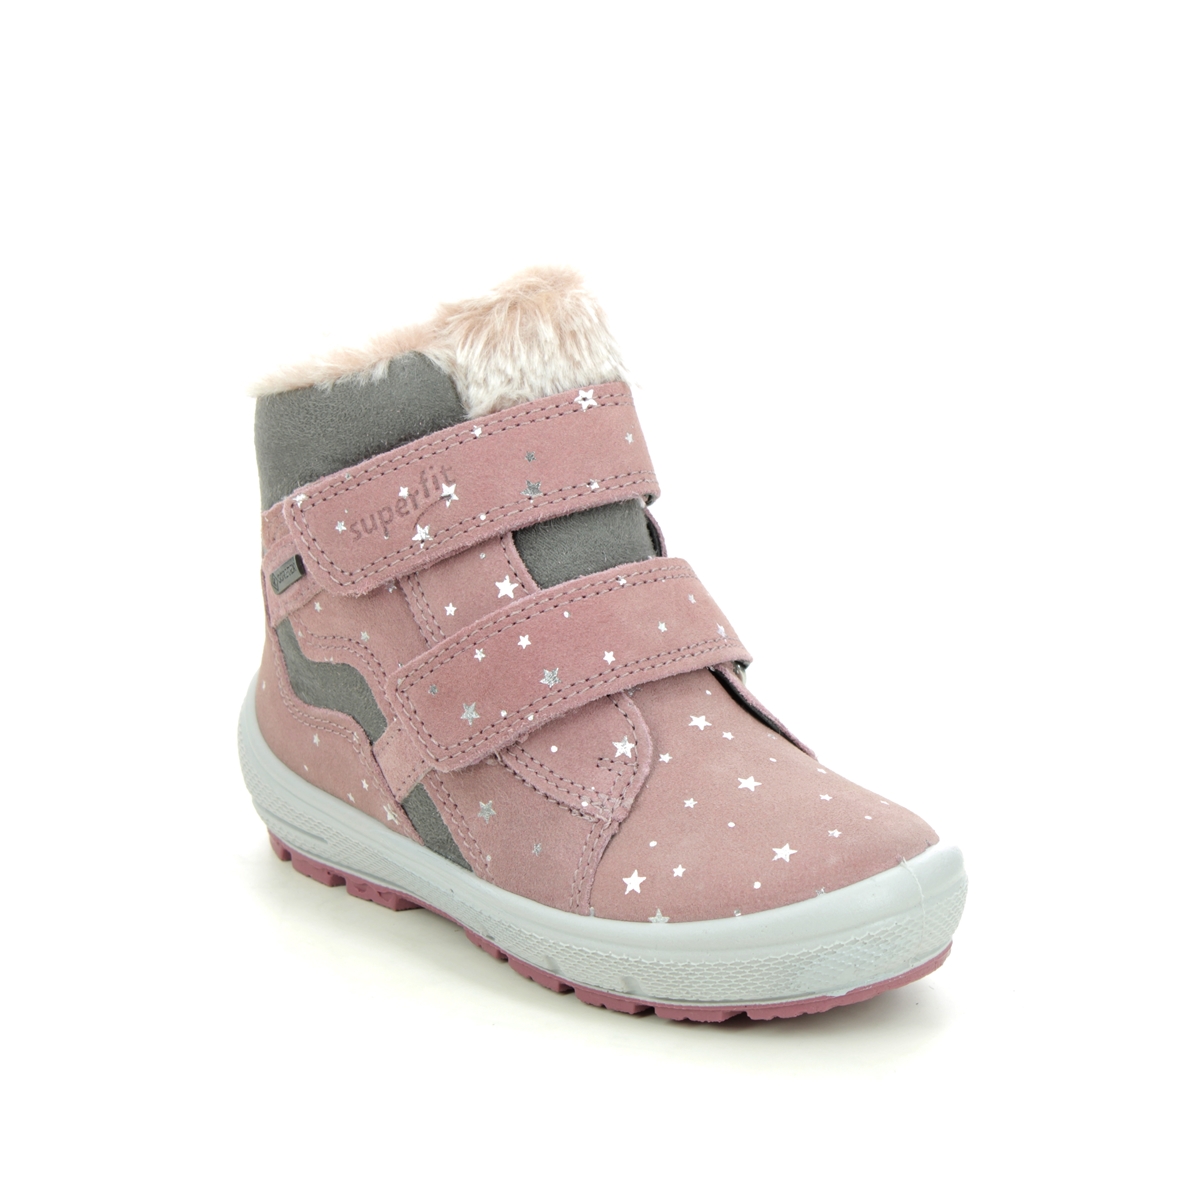 Superfit Groovy Gtx Pink Leather Kids Toddler Girls Boots 1006316-5500 In Size 21 In Plain Pink Leather